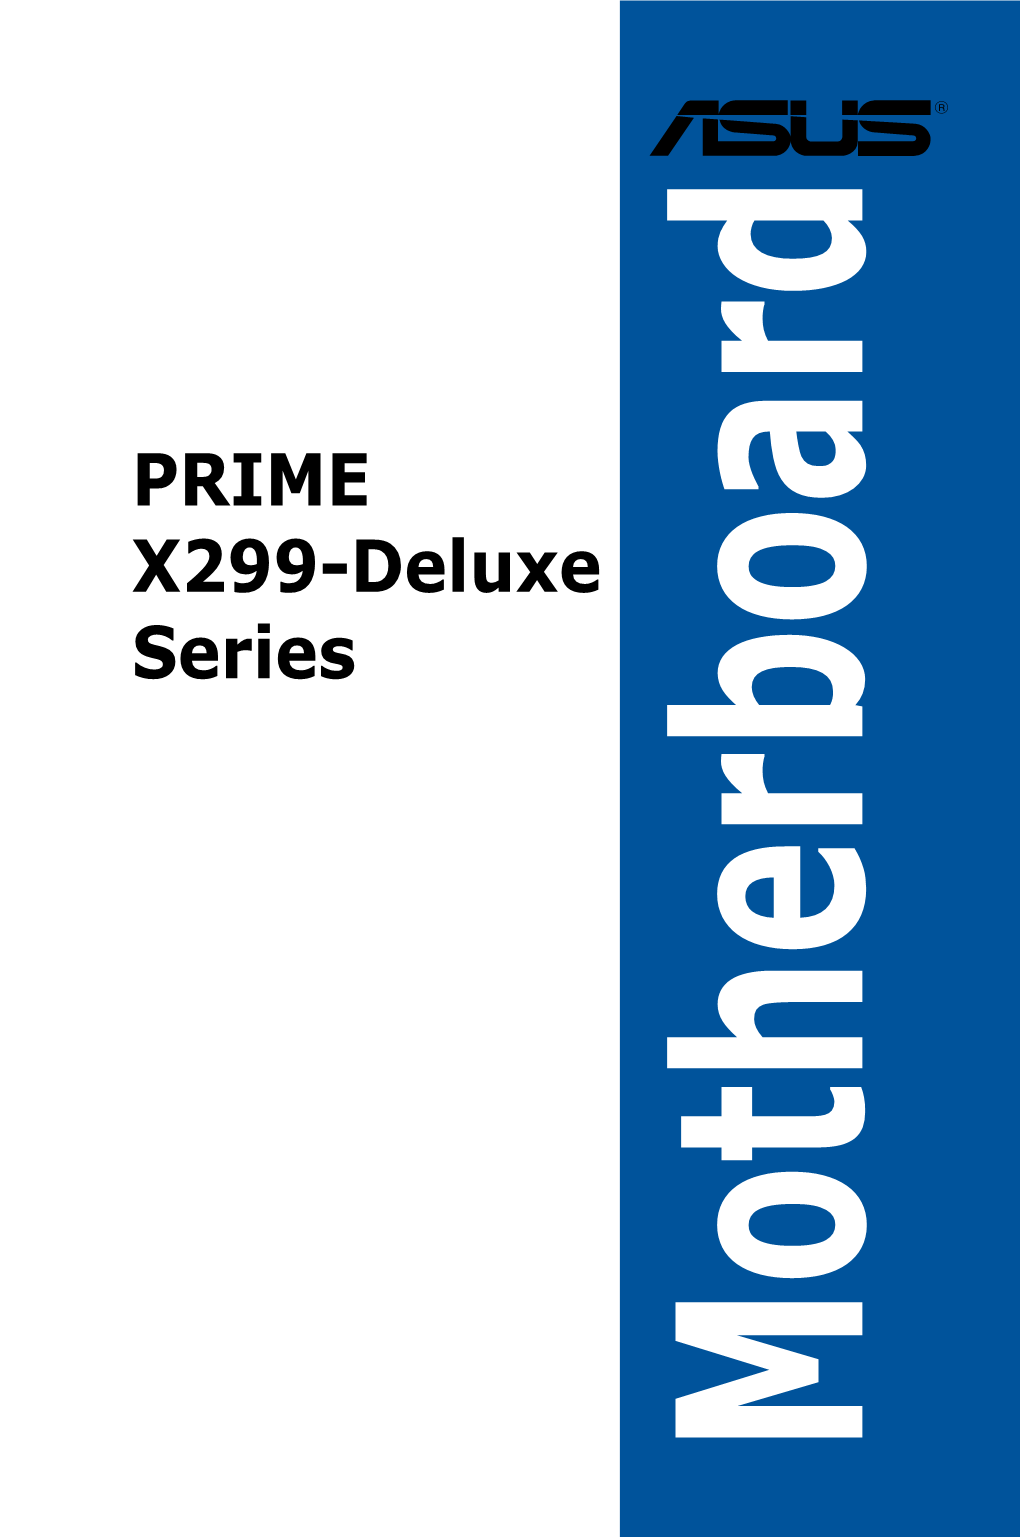 PRIME X299-DELUXE Series 1-1 1.1.2 Motherboard Layout Chapter 1